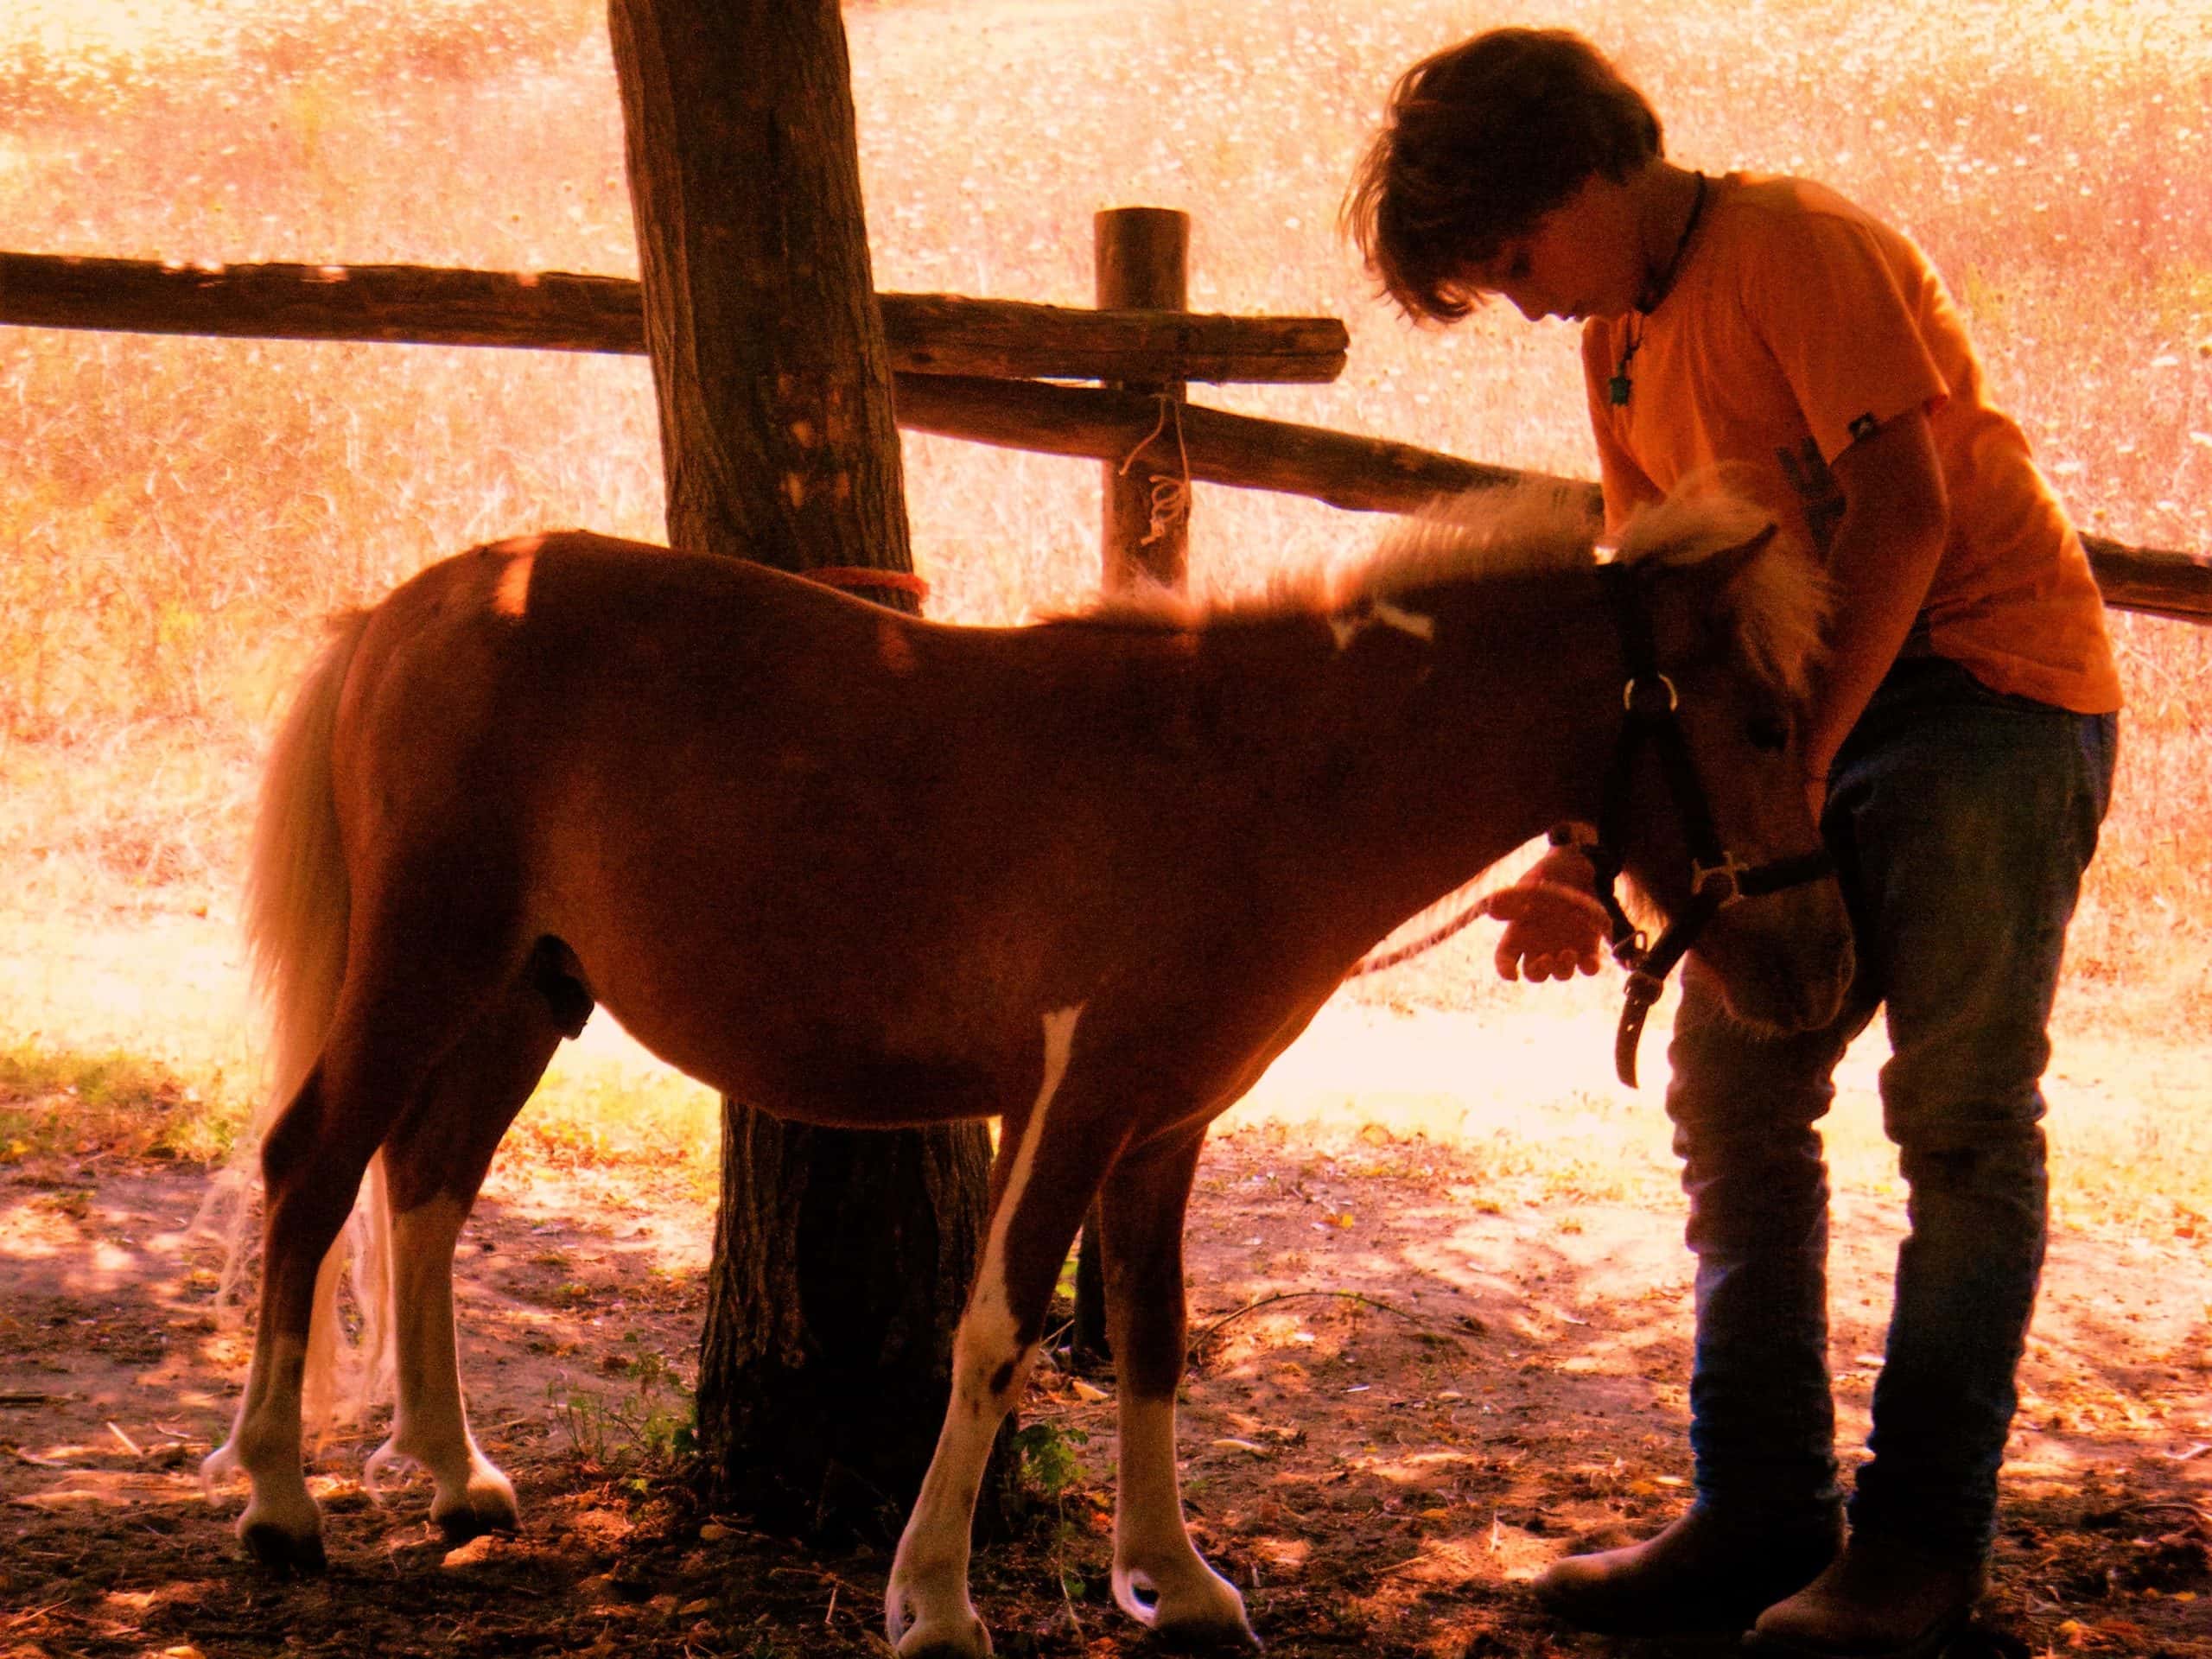 <p>In the novel <em>The Horse and His Boy</em>, two of the main characters are twins named Cor and Corin. Cor is associated with horses, while Corin is well-known for his affiliation with boxing. These twins are a clear reference to the mythological heroes Castor and Polydeuces—also known as Pollux to the Romans. These two twins were eventually honored by the gods by becoming constellations in the sky as Gemini.</p>